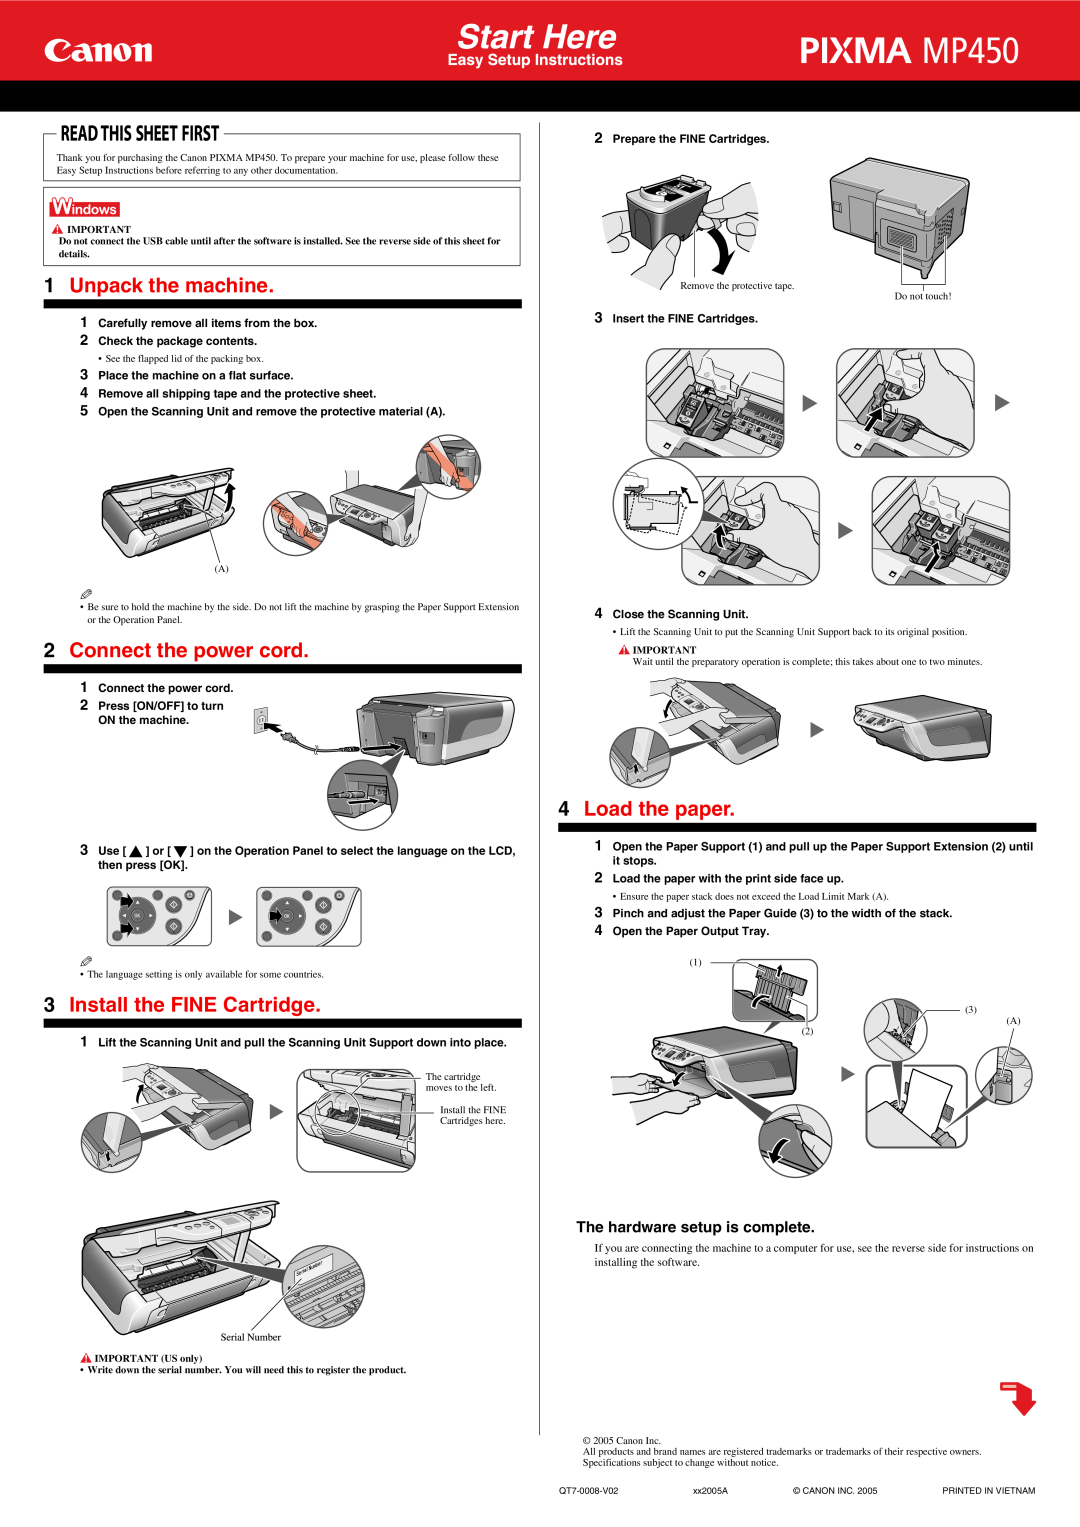 Canon MP450 specifications Unpack the machine, Connect the power cord, Install the FINE Cartridge, Load the paper 